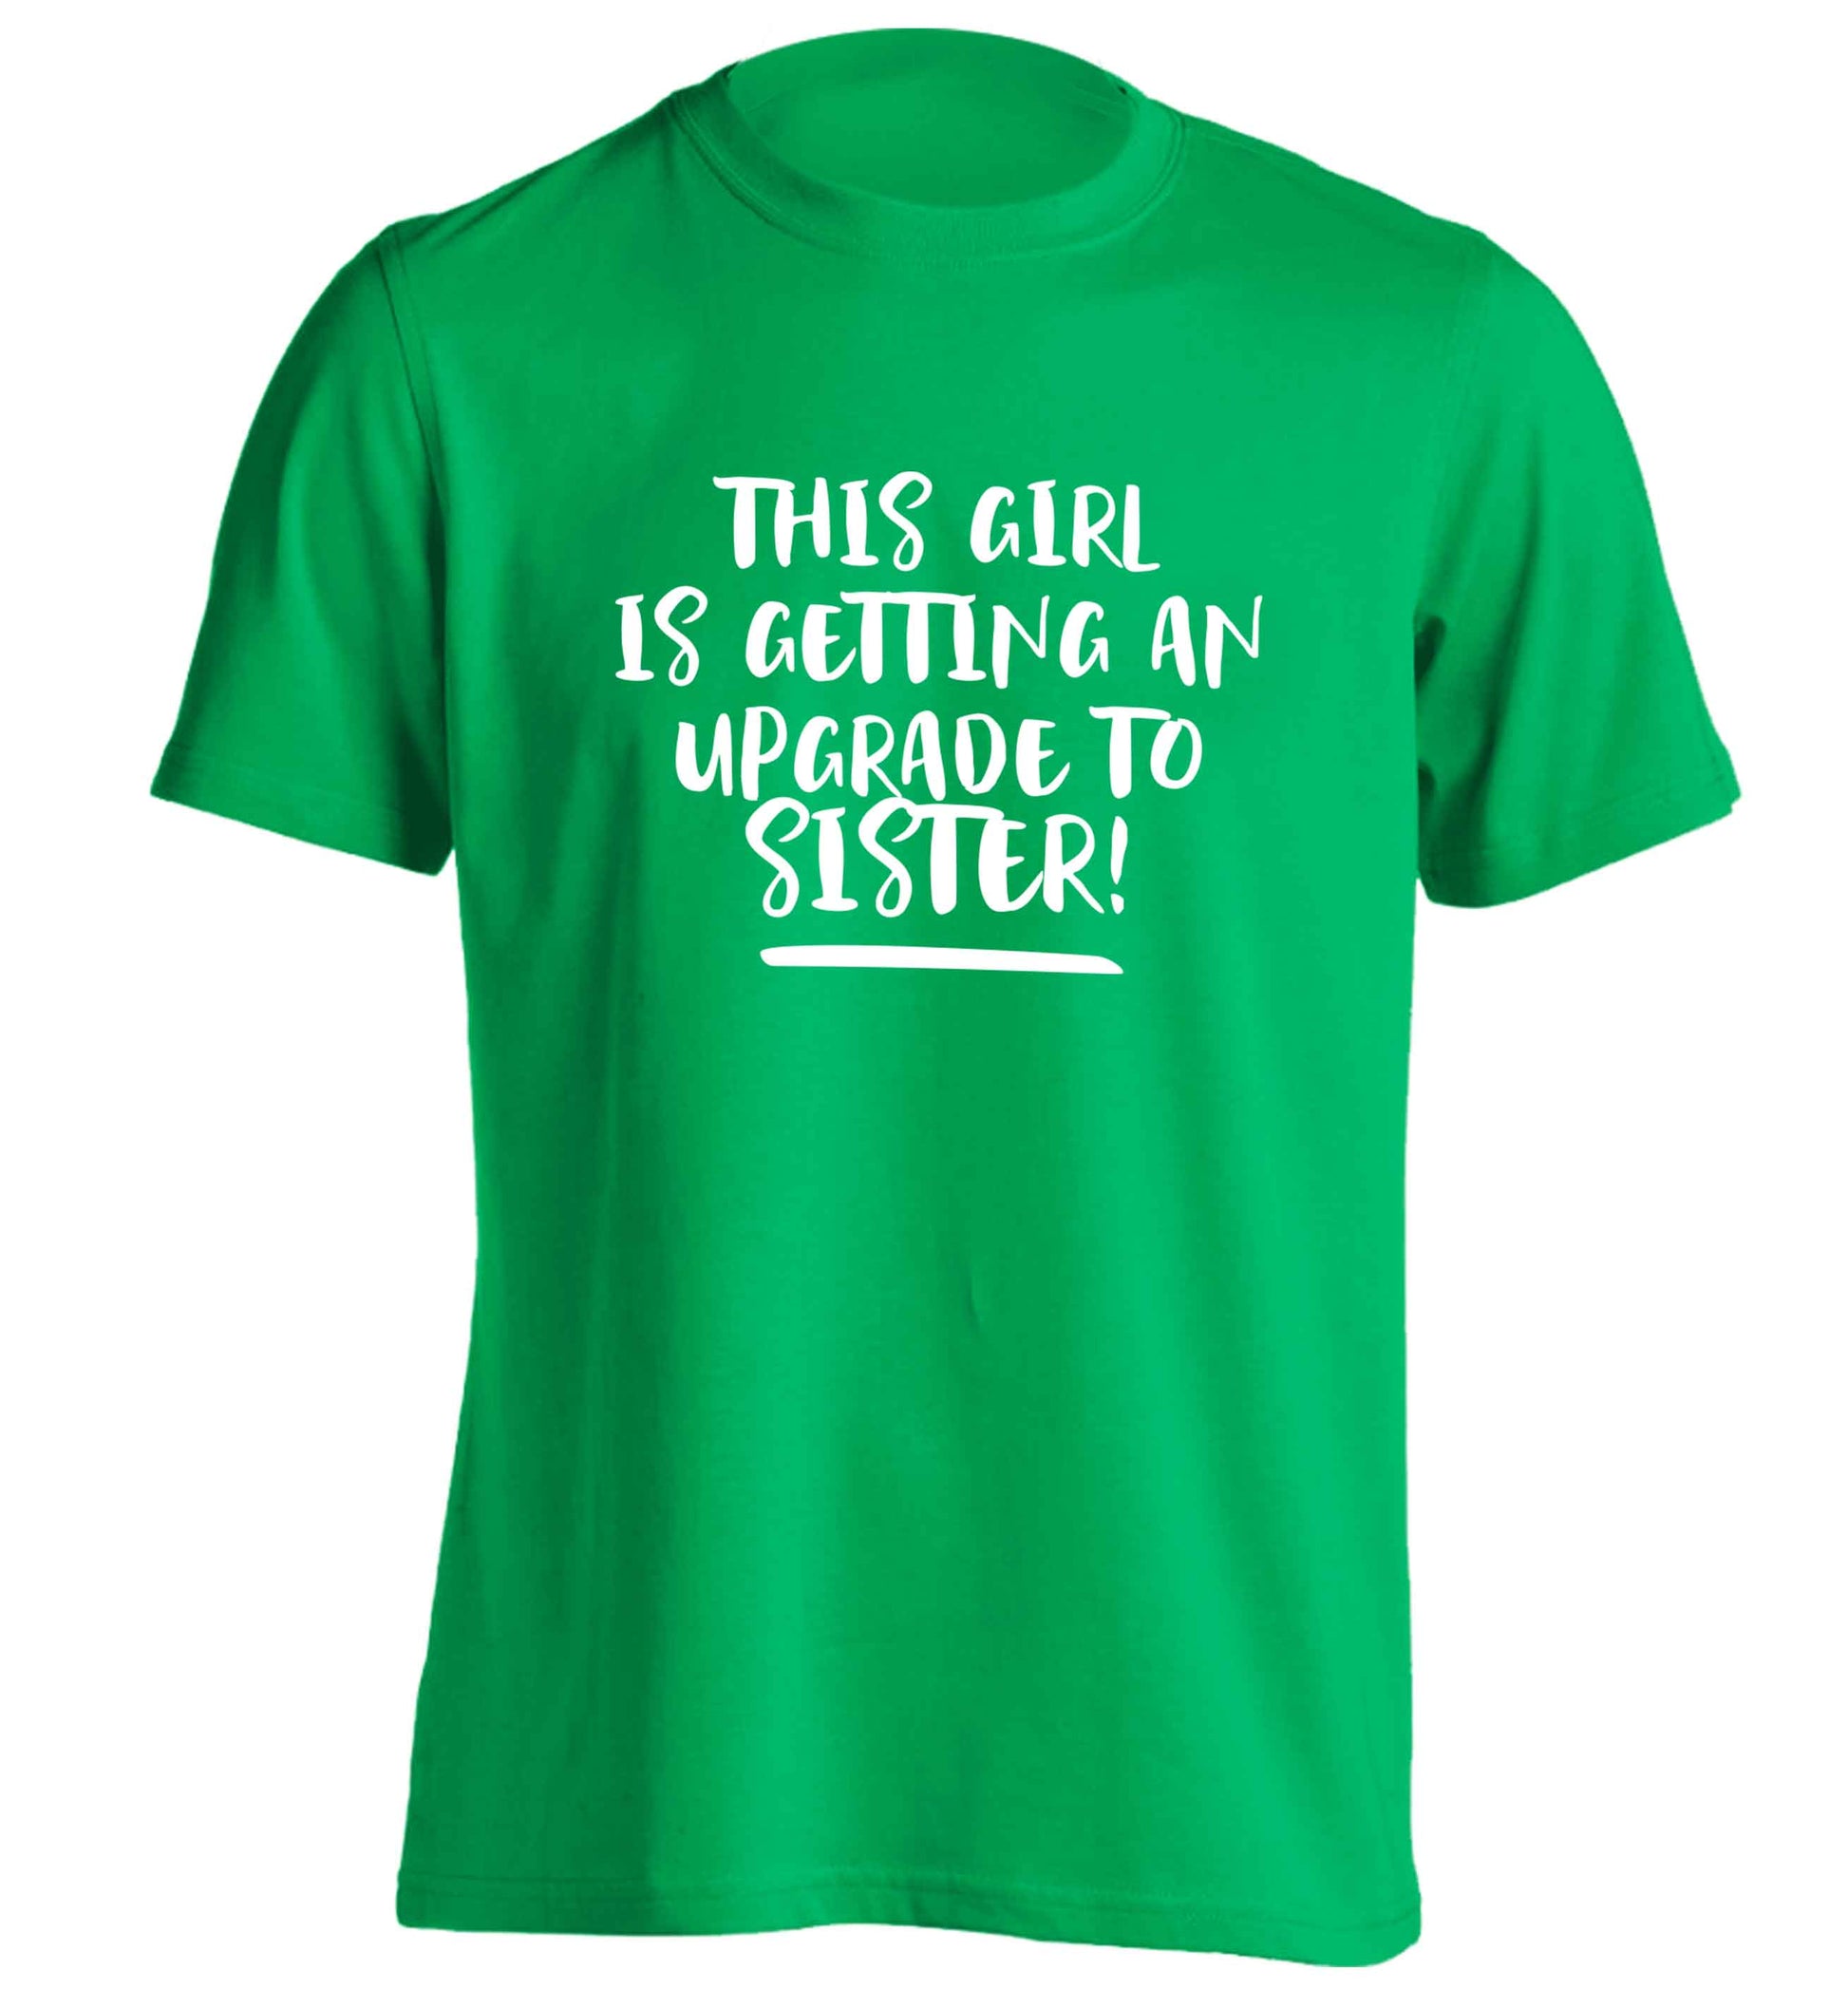 This girl is getting an upgrade to sister! adults unisex green Tshirt 2XL